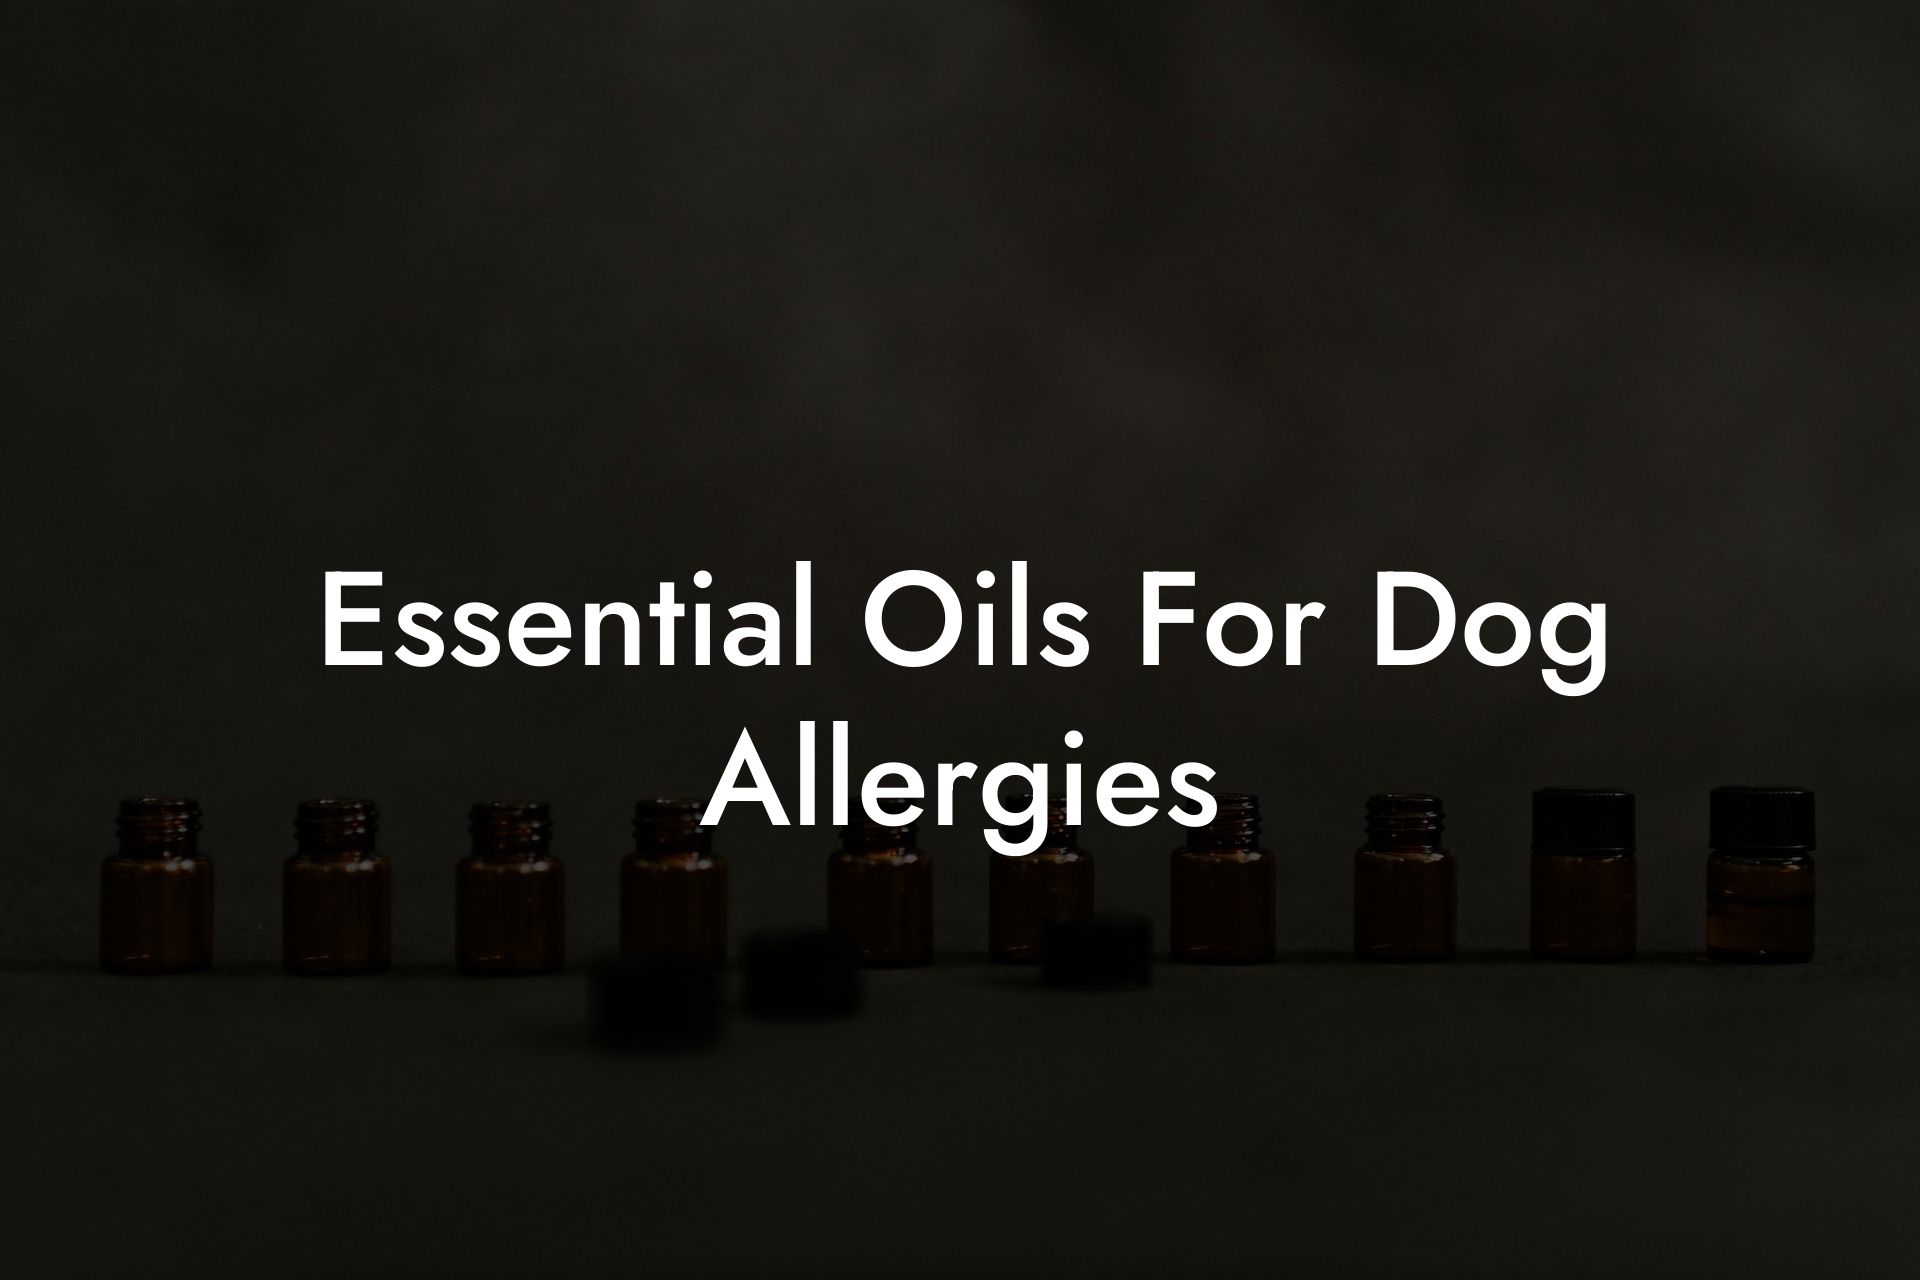 Essential Oils For Dog Allergies